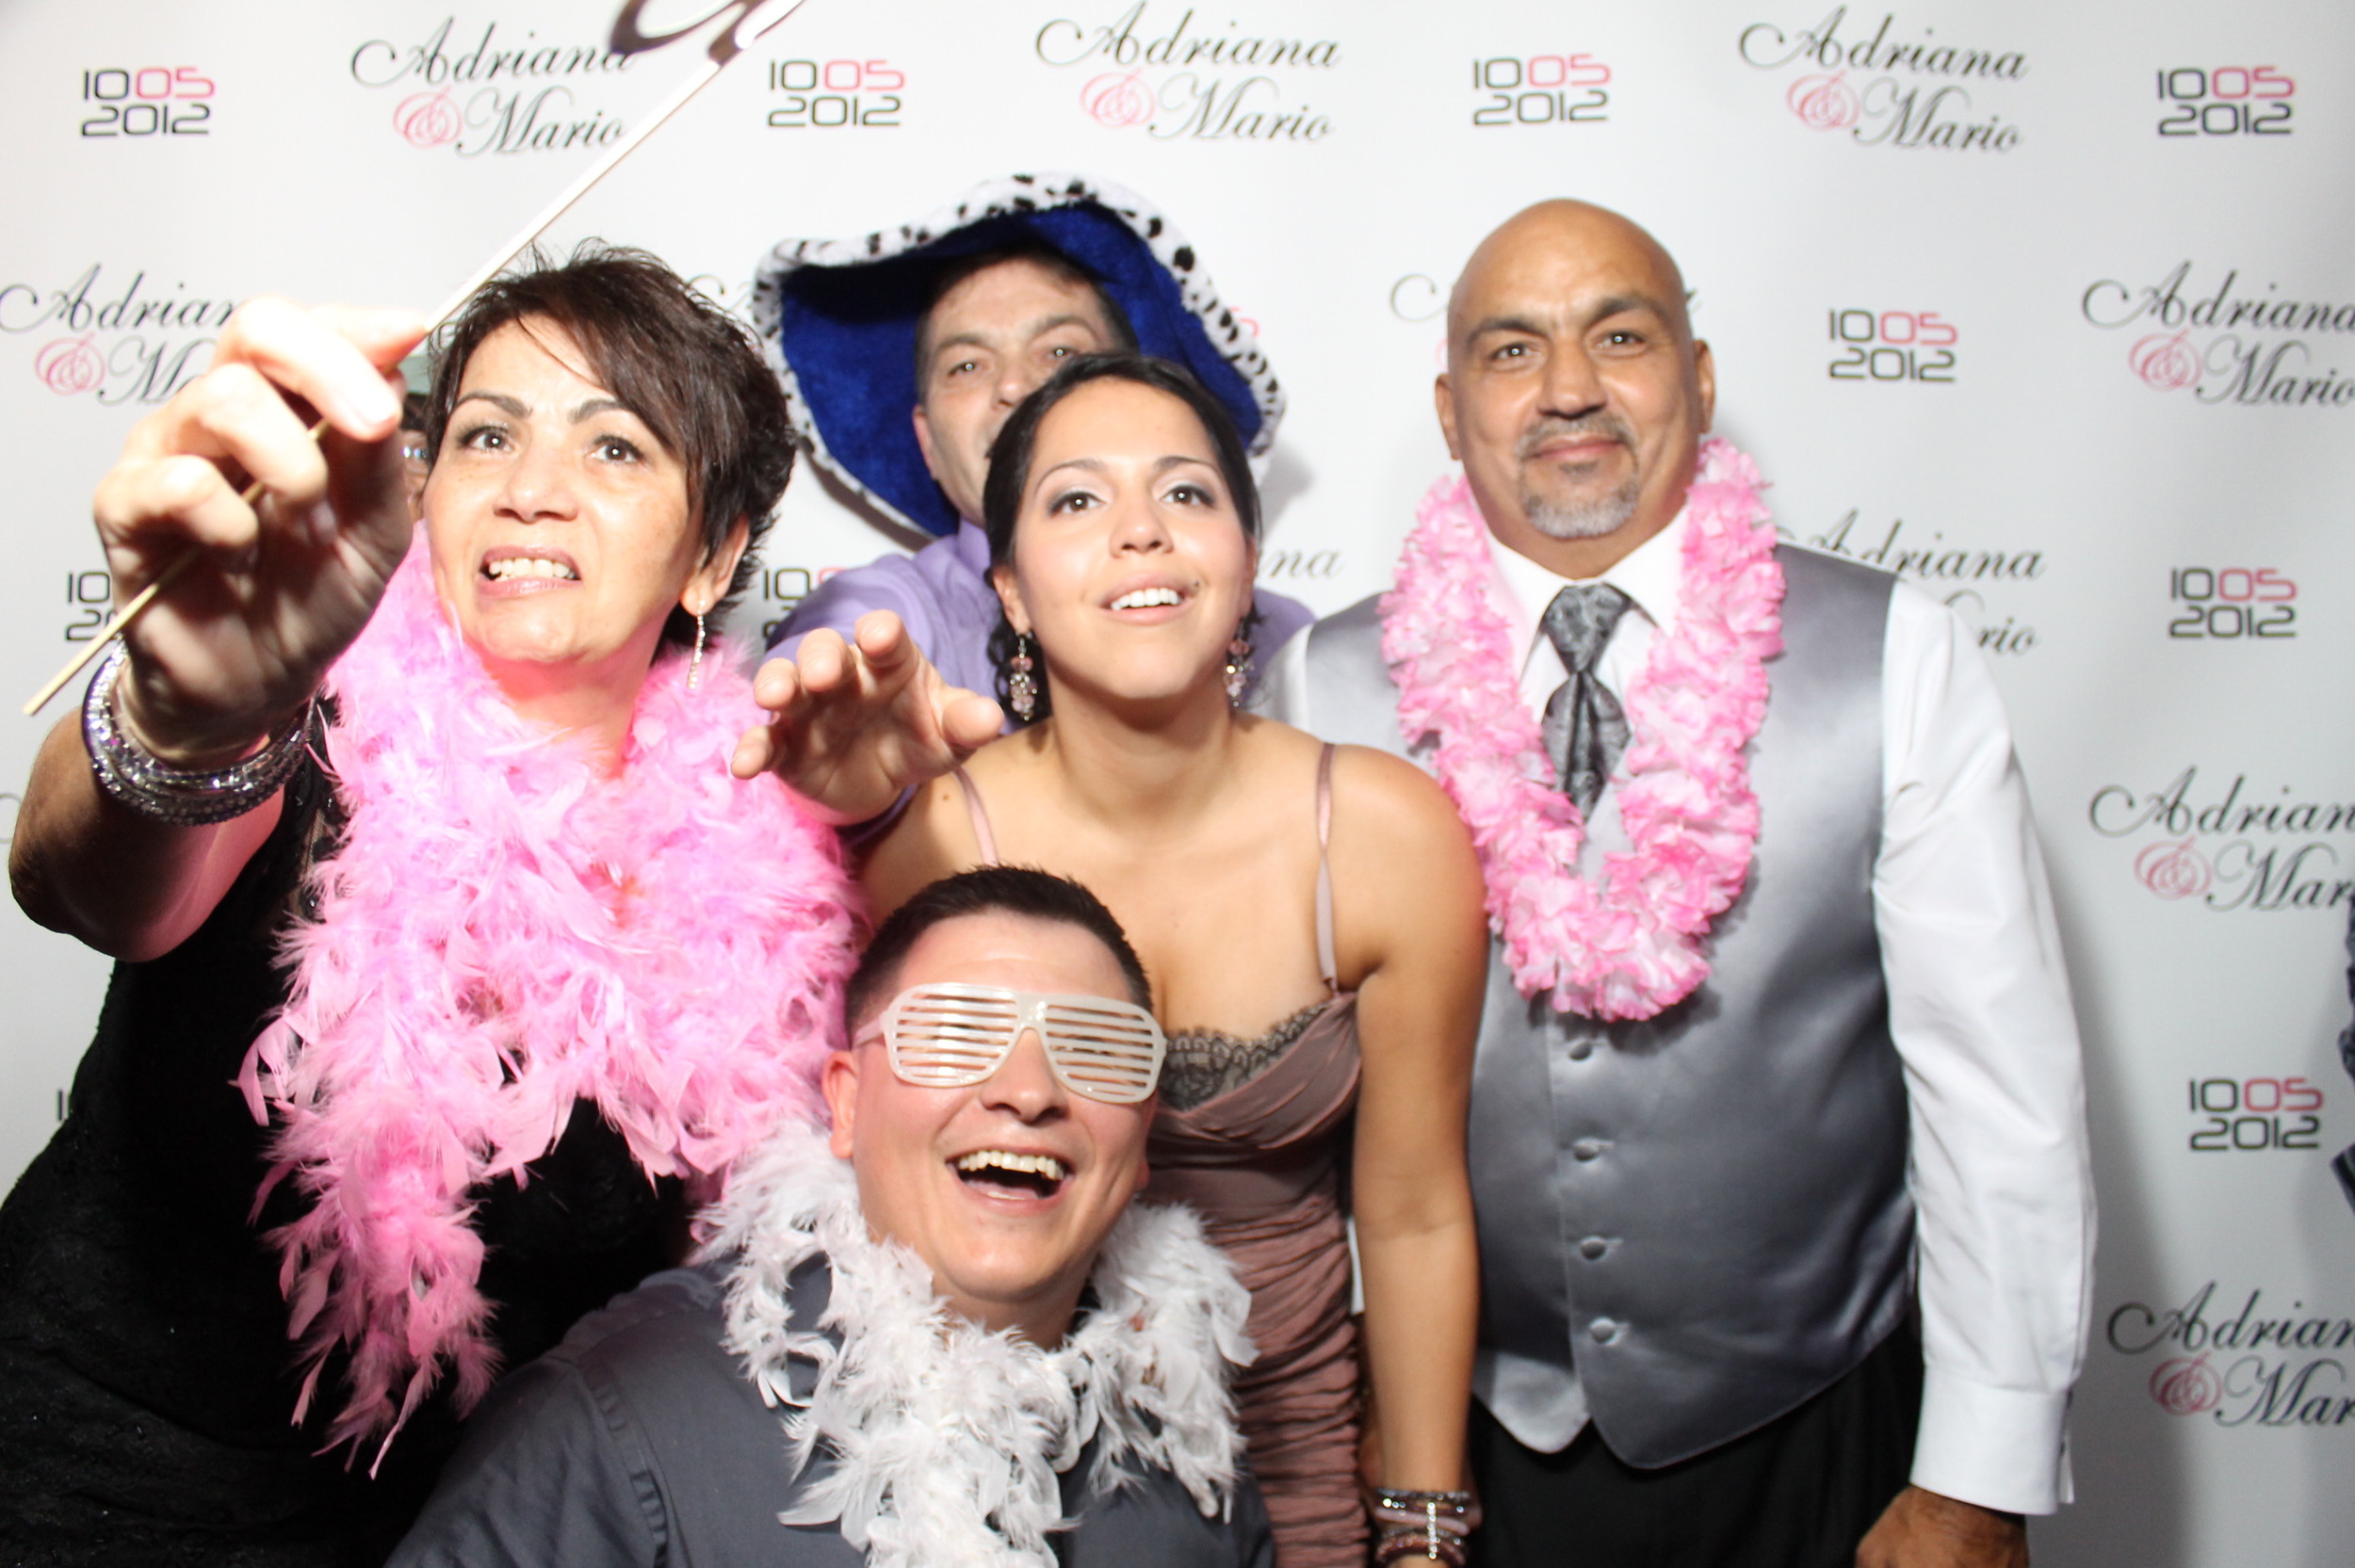 Snapshot Photobooths at the Grand Marquis in Old Bridge, New Jersey